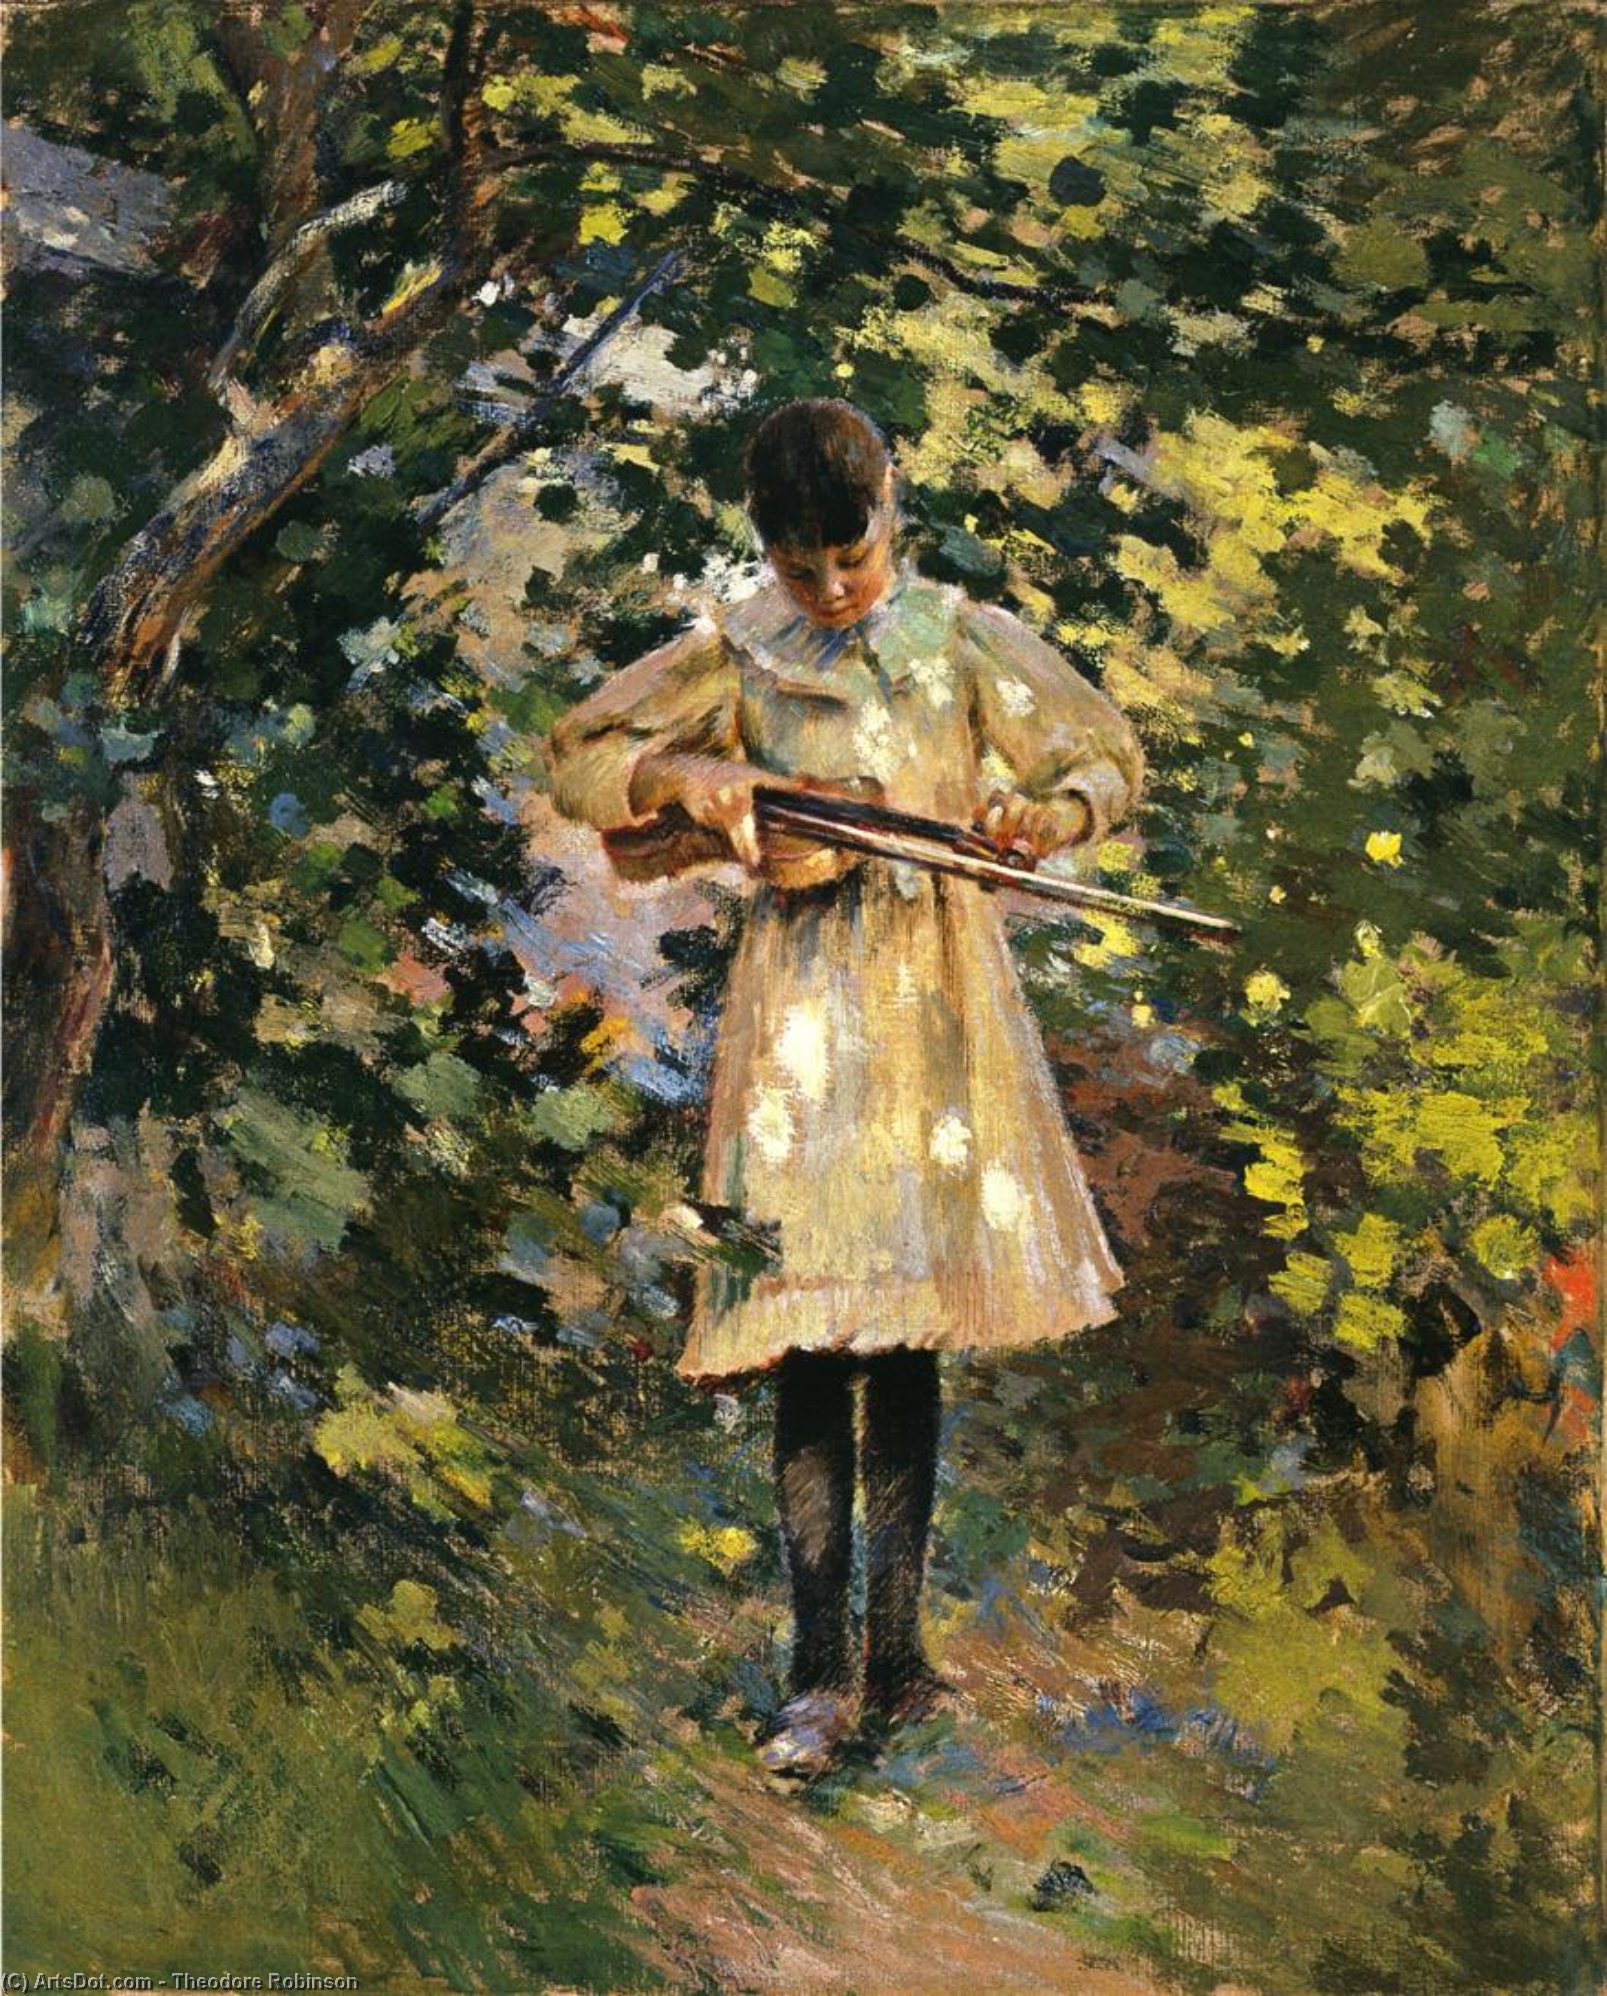 Wikioo.org - Encyklopedia Sztuk Pięknych - Malarstwo, Grafika Theodore Robinson - The Young Violinist (also known as Margaret Perry)